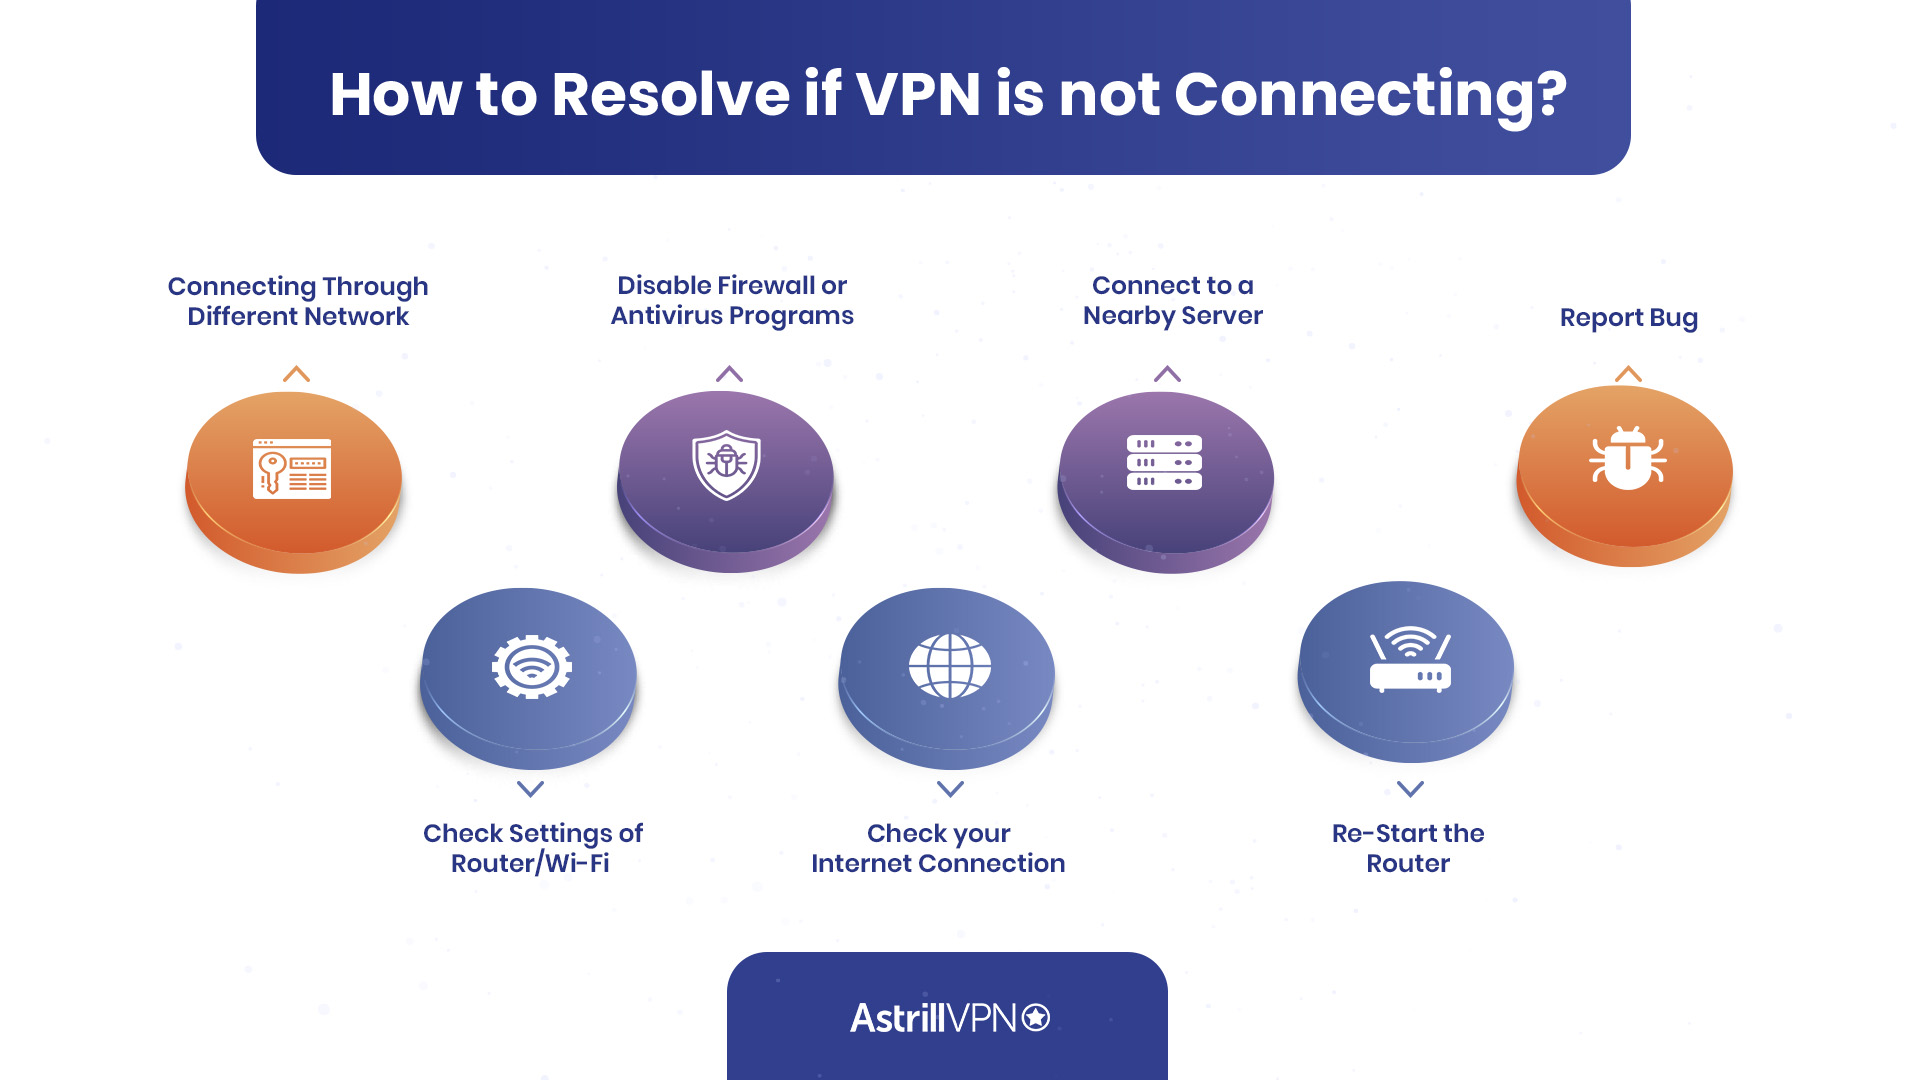 How to resolve if VPN is not connecting